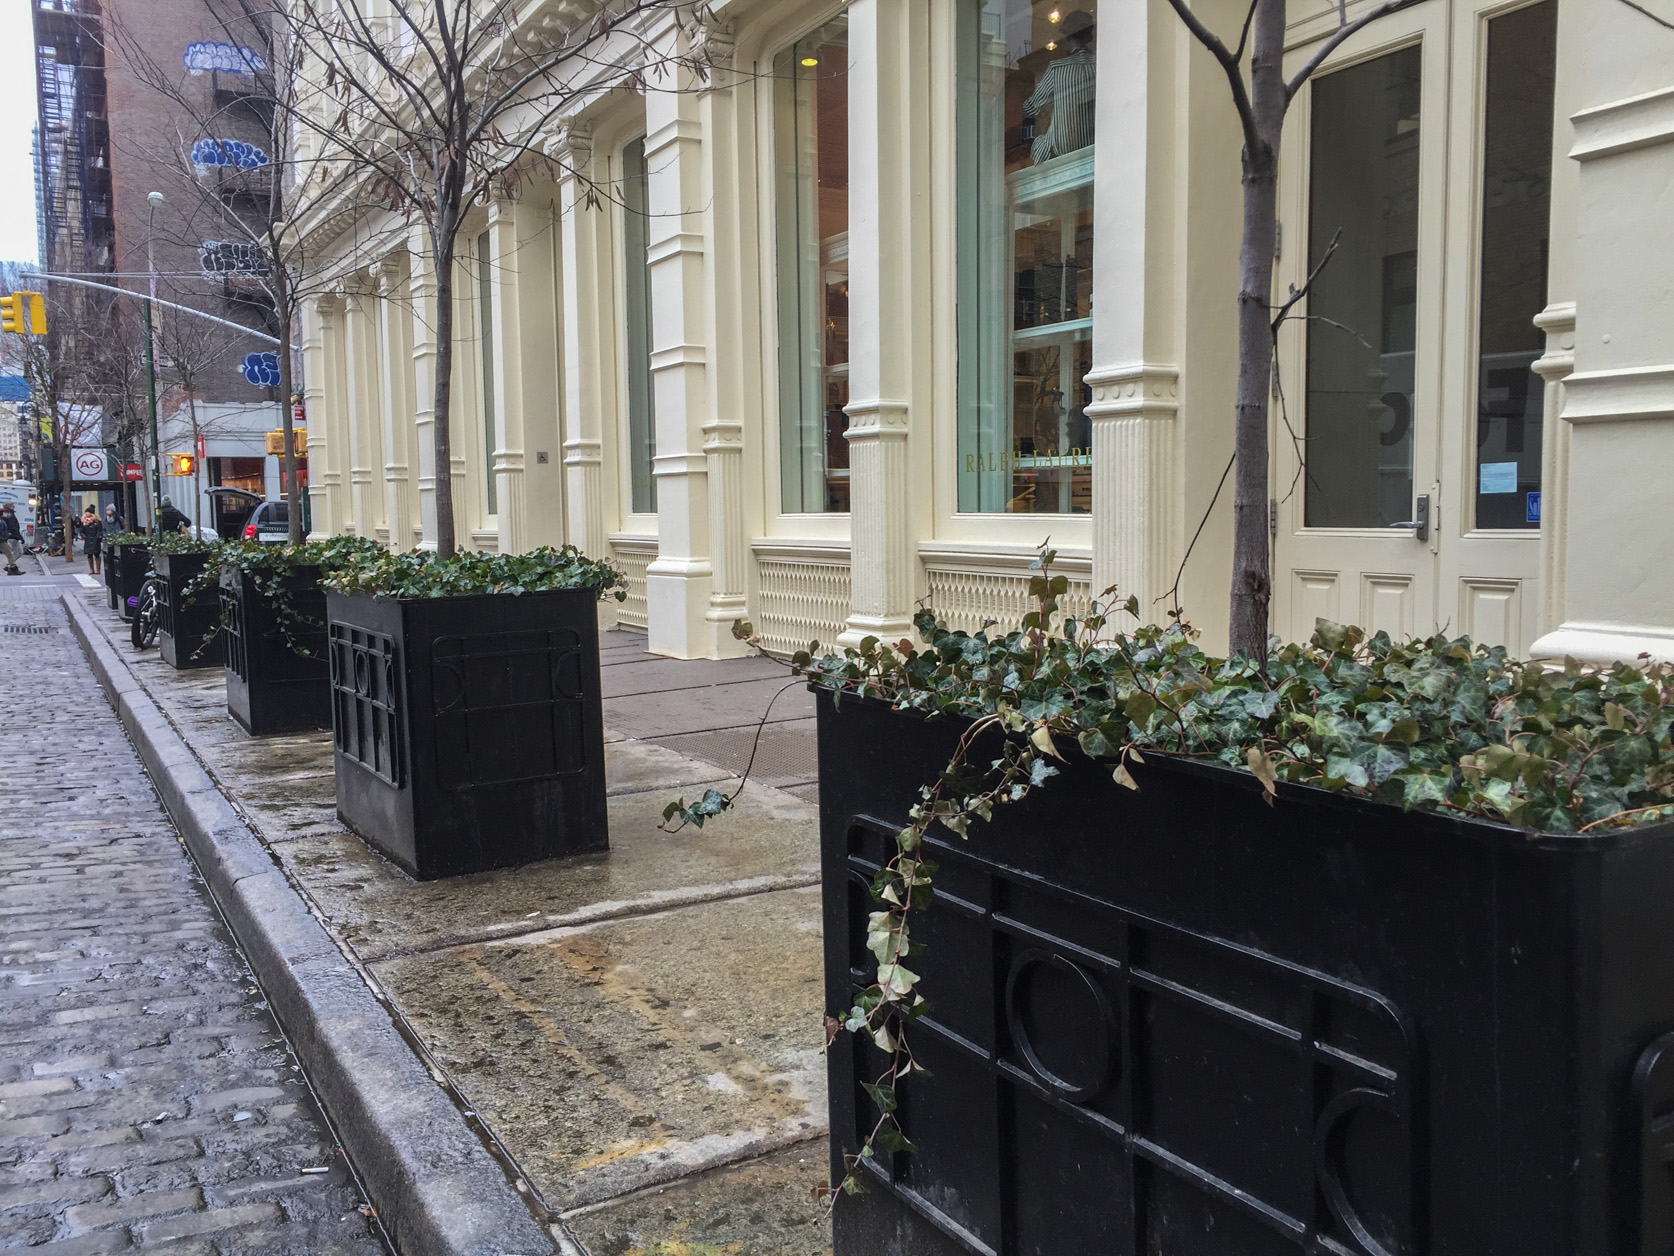 Black planters outside the Ralph Lauren boutique, also on Greene St.